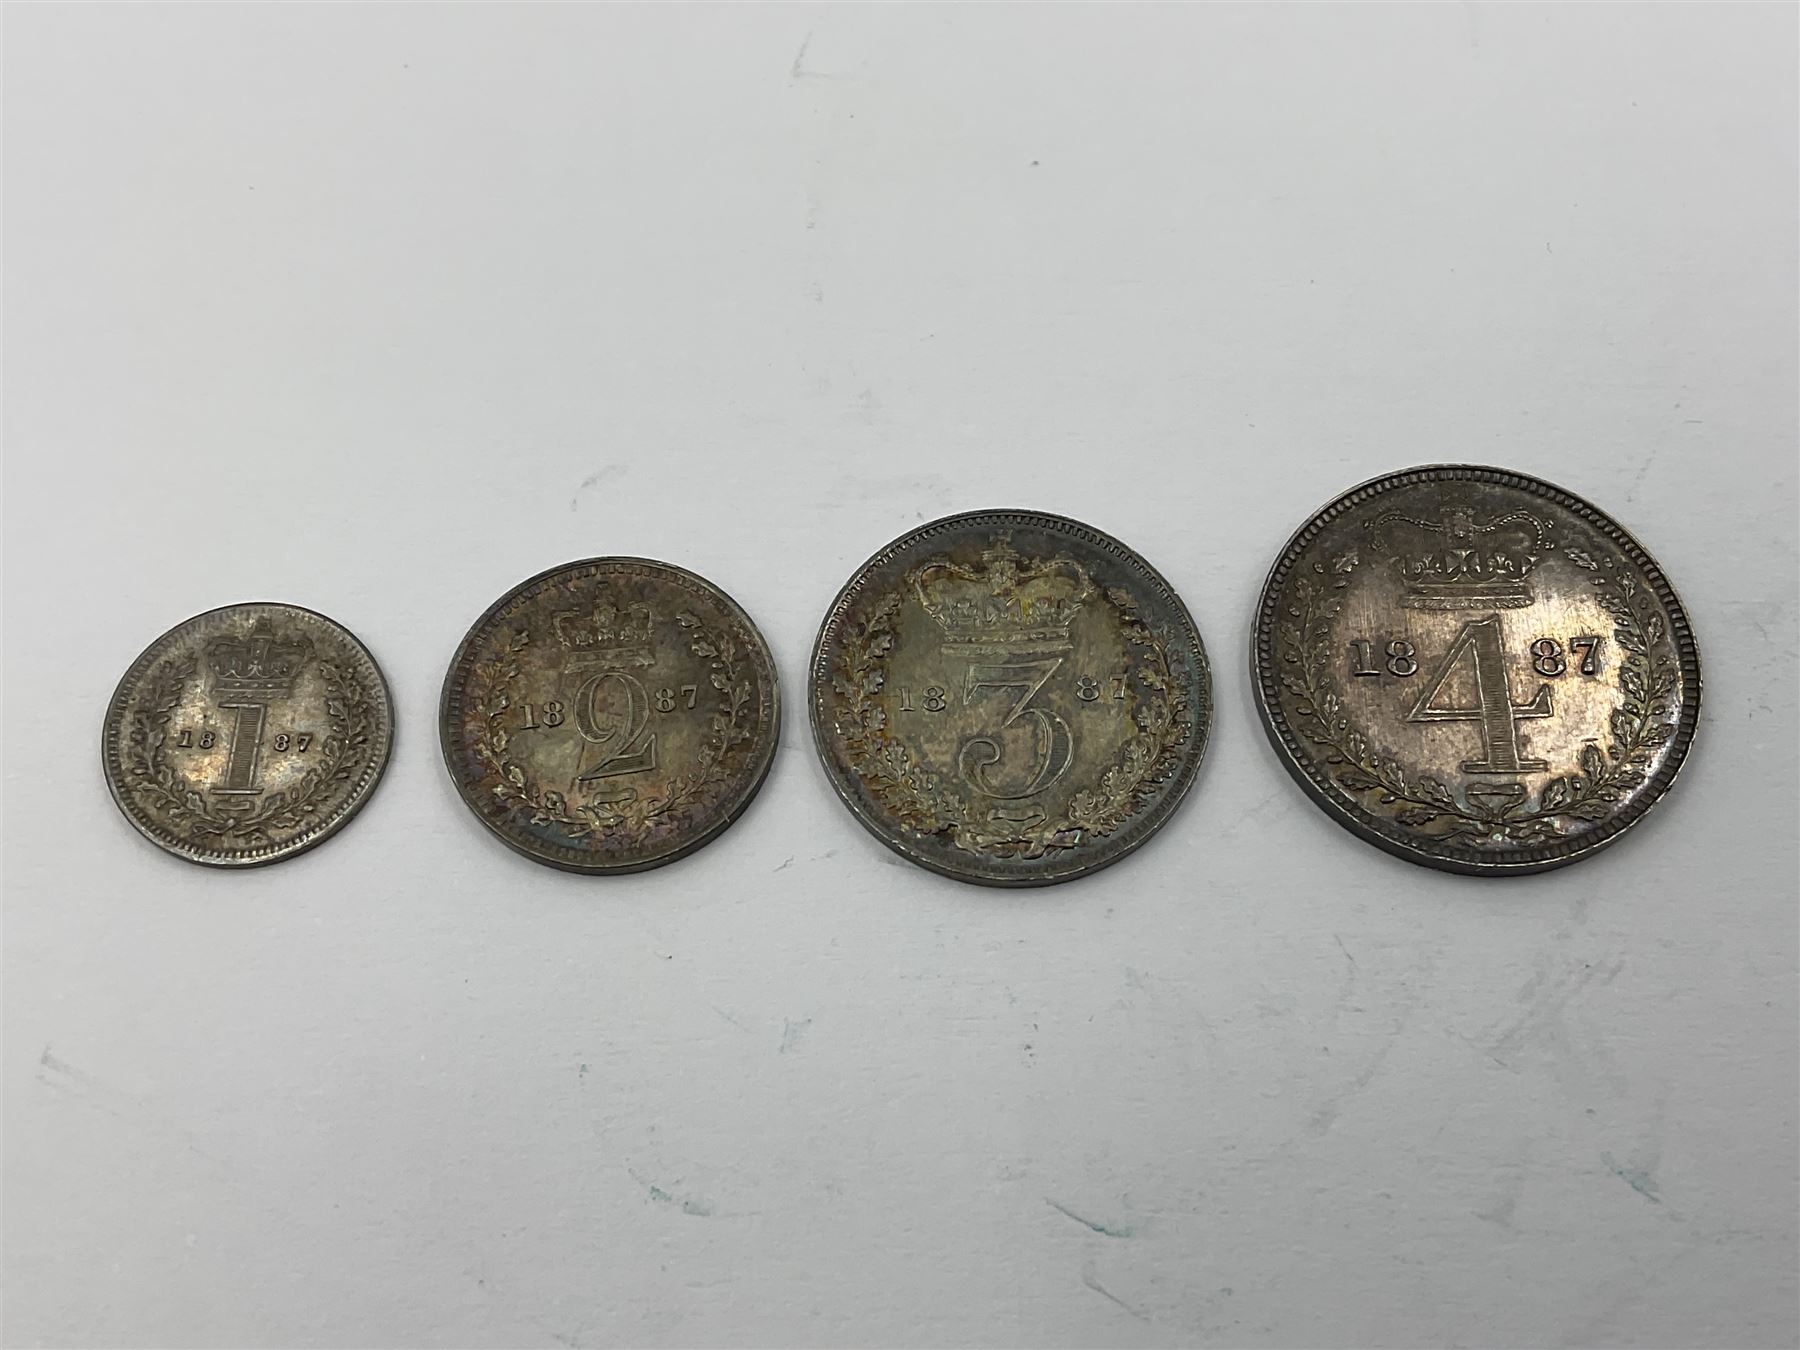 Queen Victoria 1887 maundy coin set - Image 2 of 3